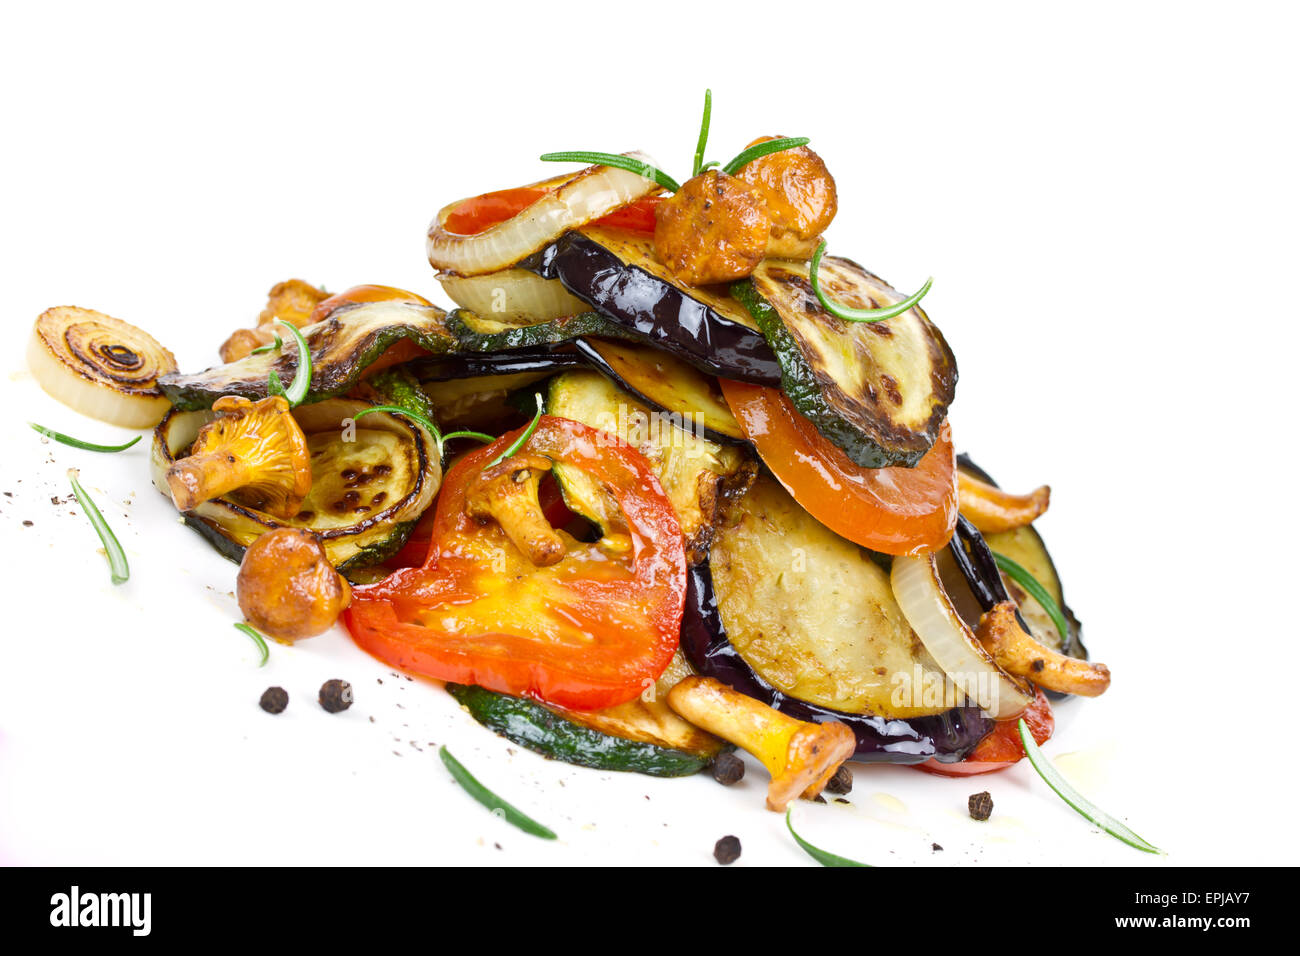 grilled vegetables Stock Photo